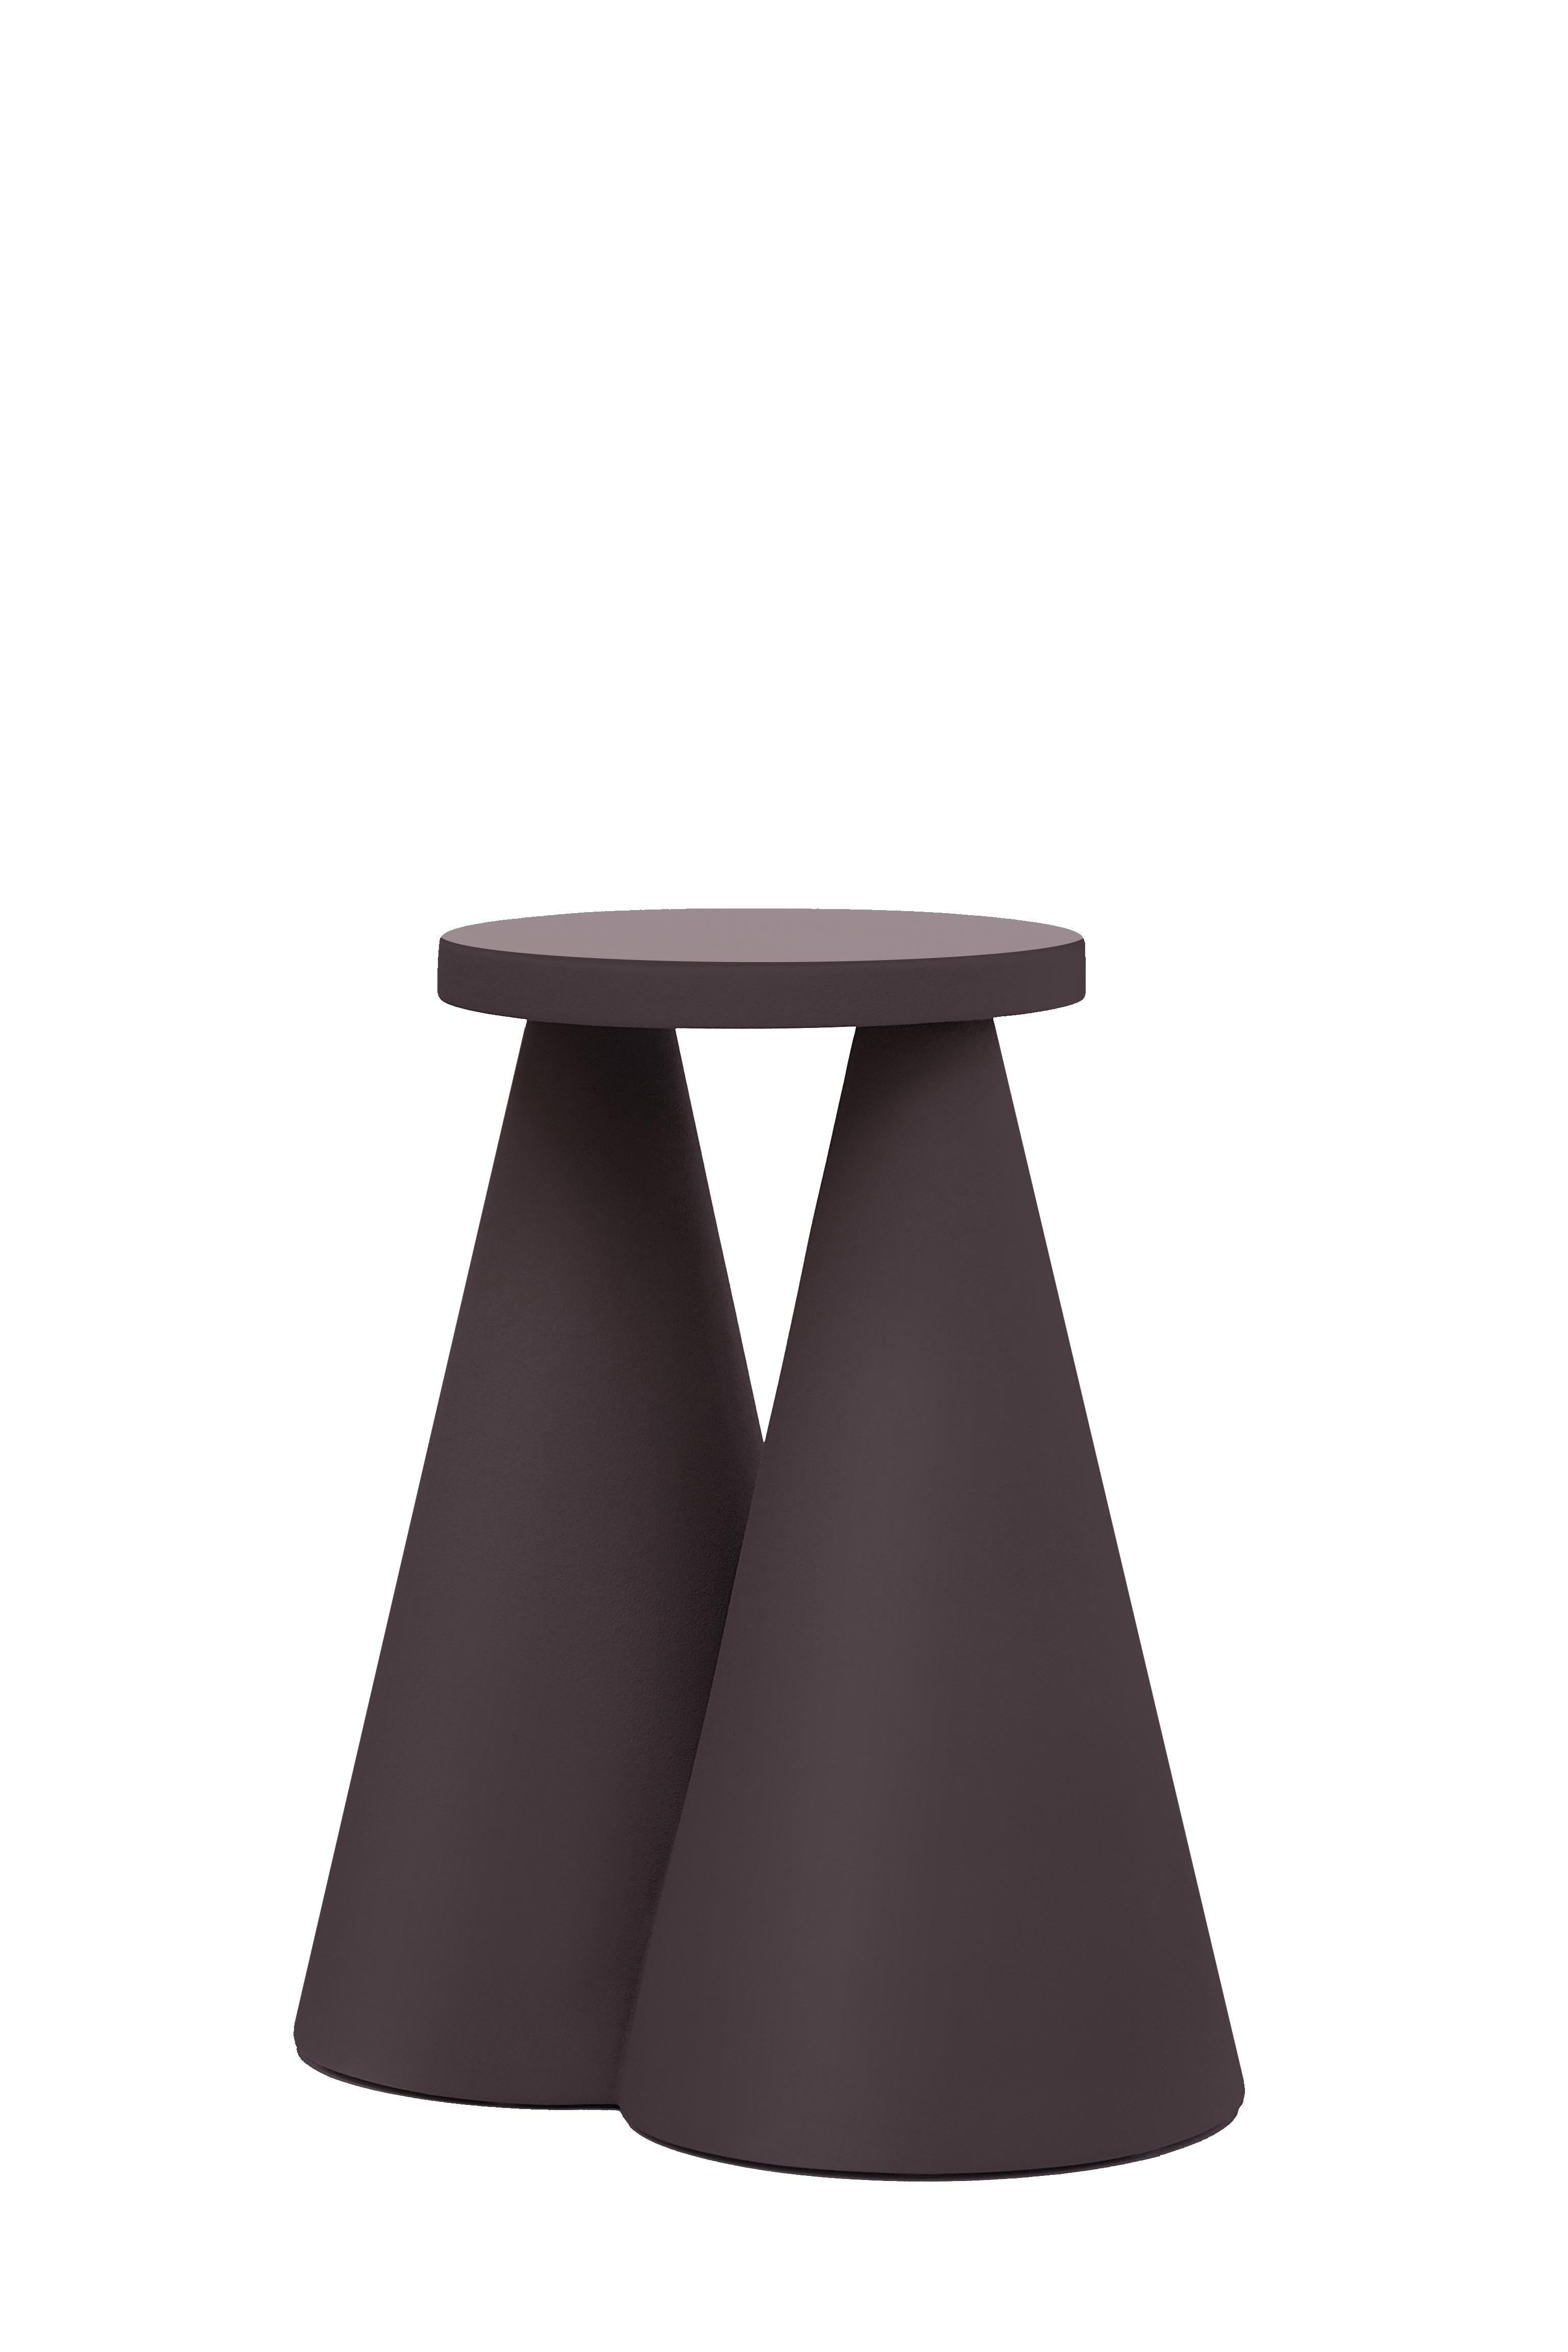 Contemporary Pair of Isola Side Table by Cara Davide